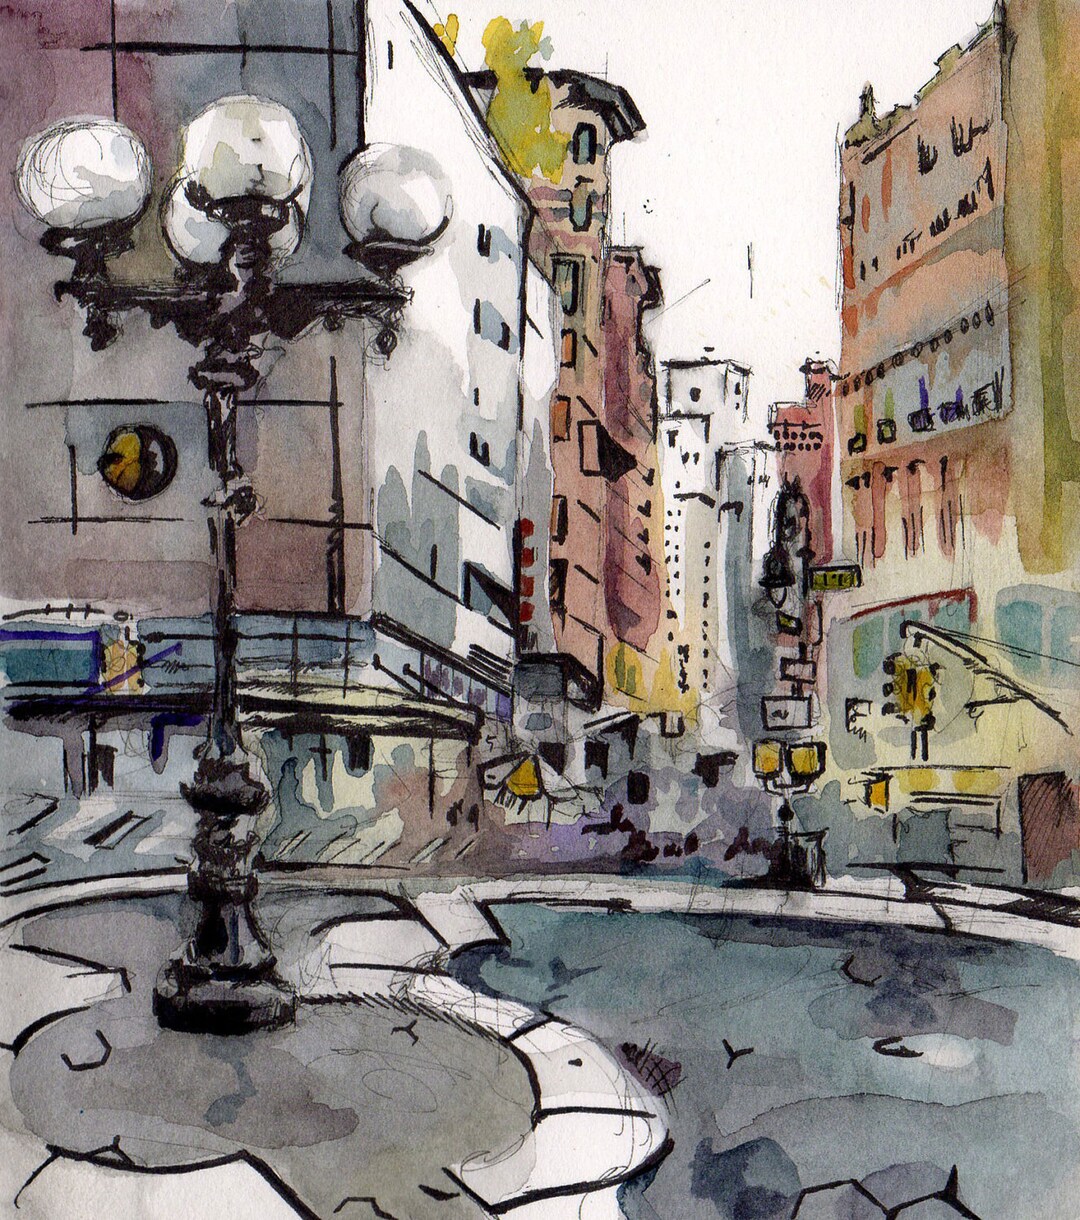 Watercolors for Absolute Beginners - The 92nd Street Y, New York